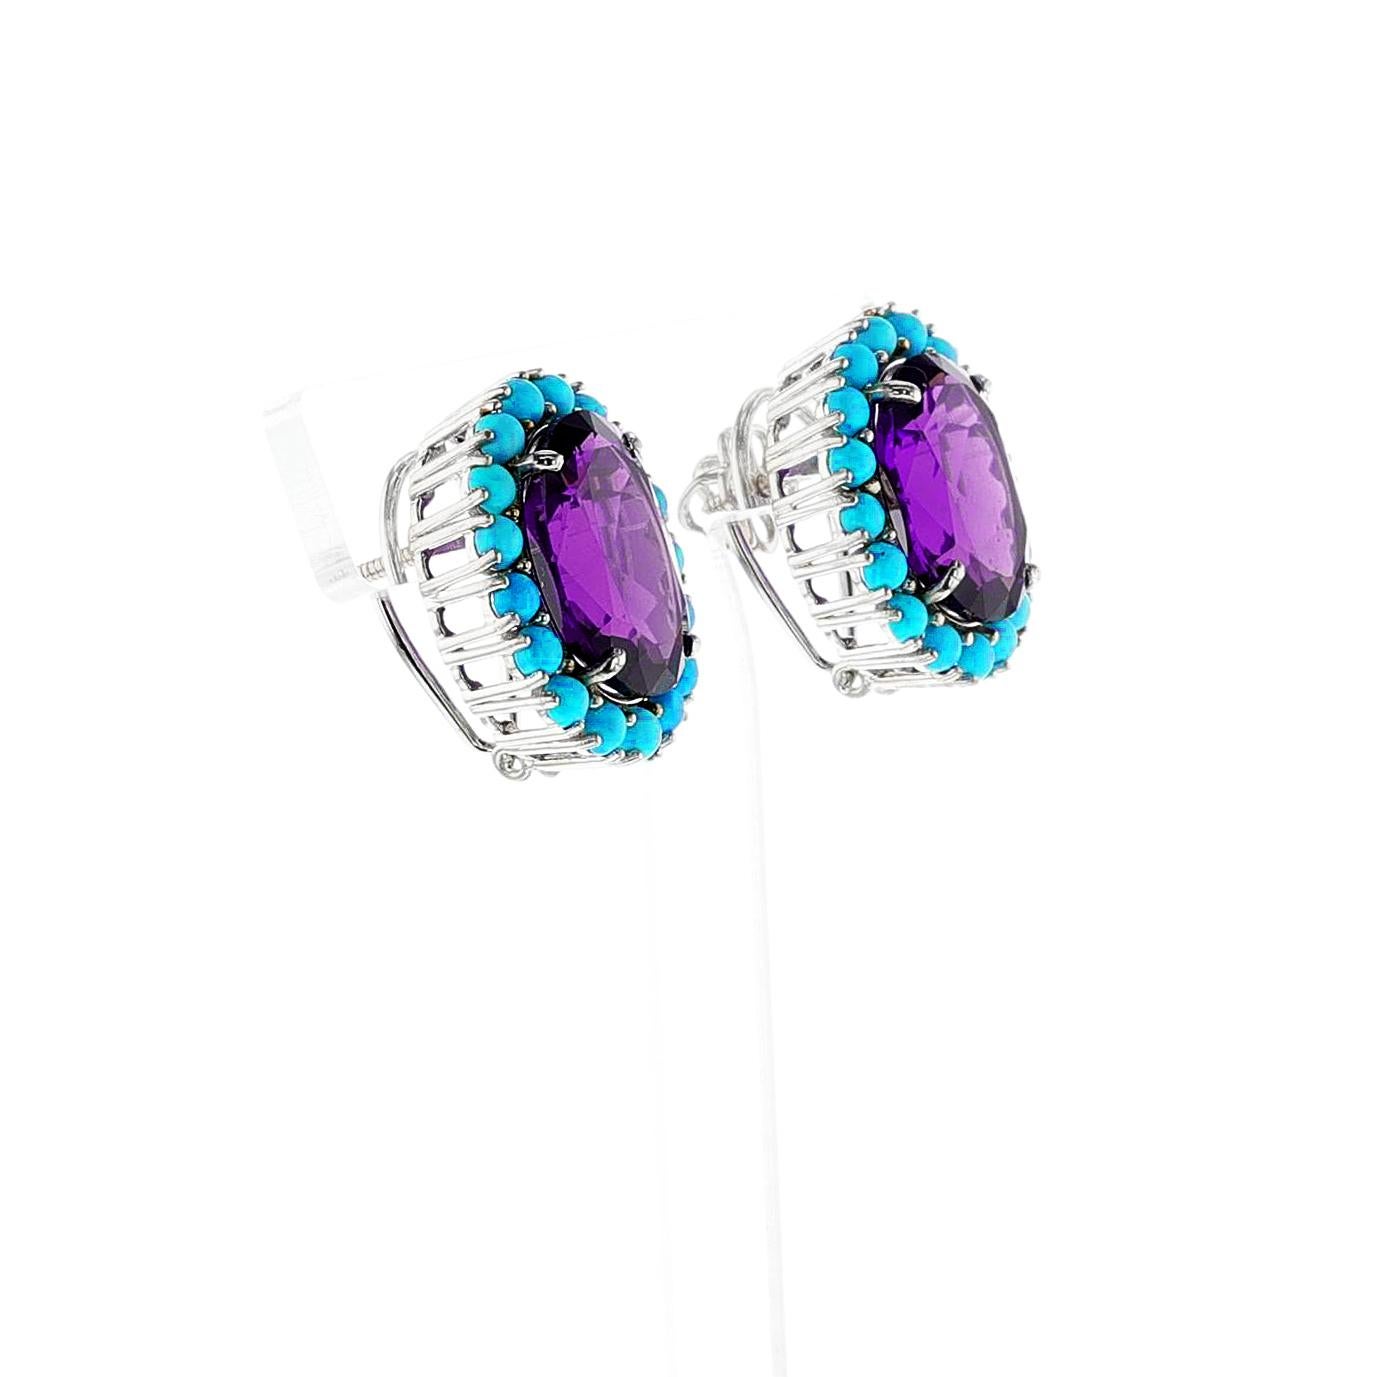 Women's or Men's Oval Amethyst Cut and Turquoise Cabochon Earrings, 18k For Sale